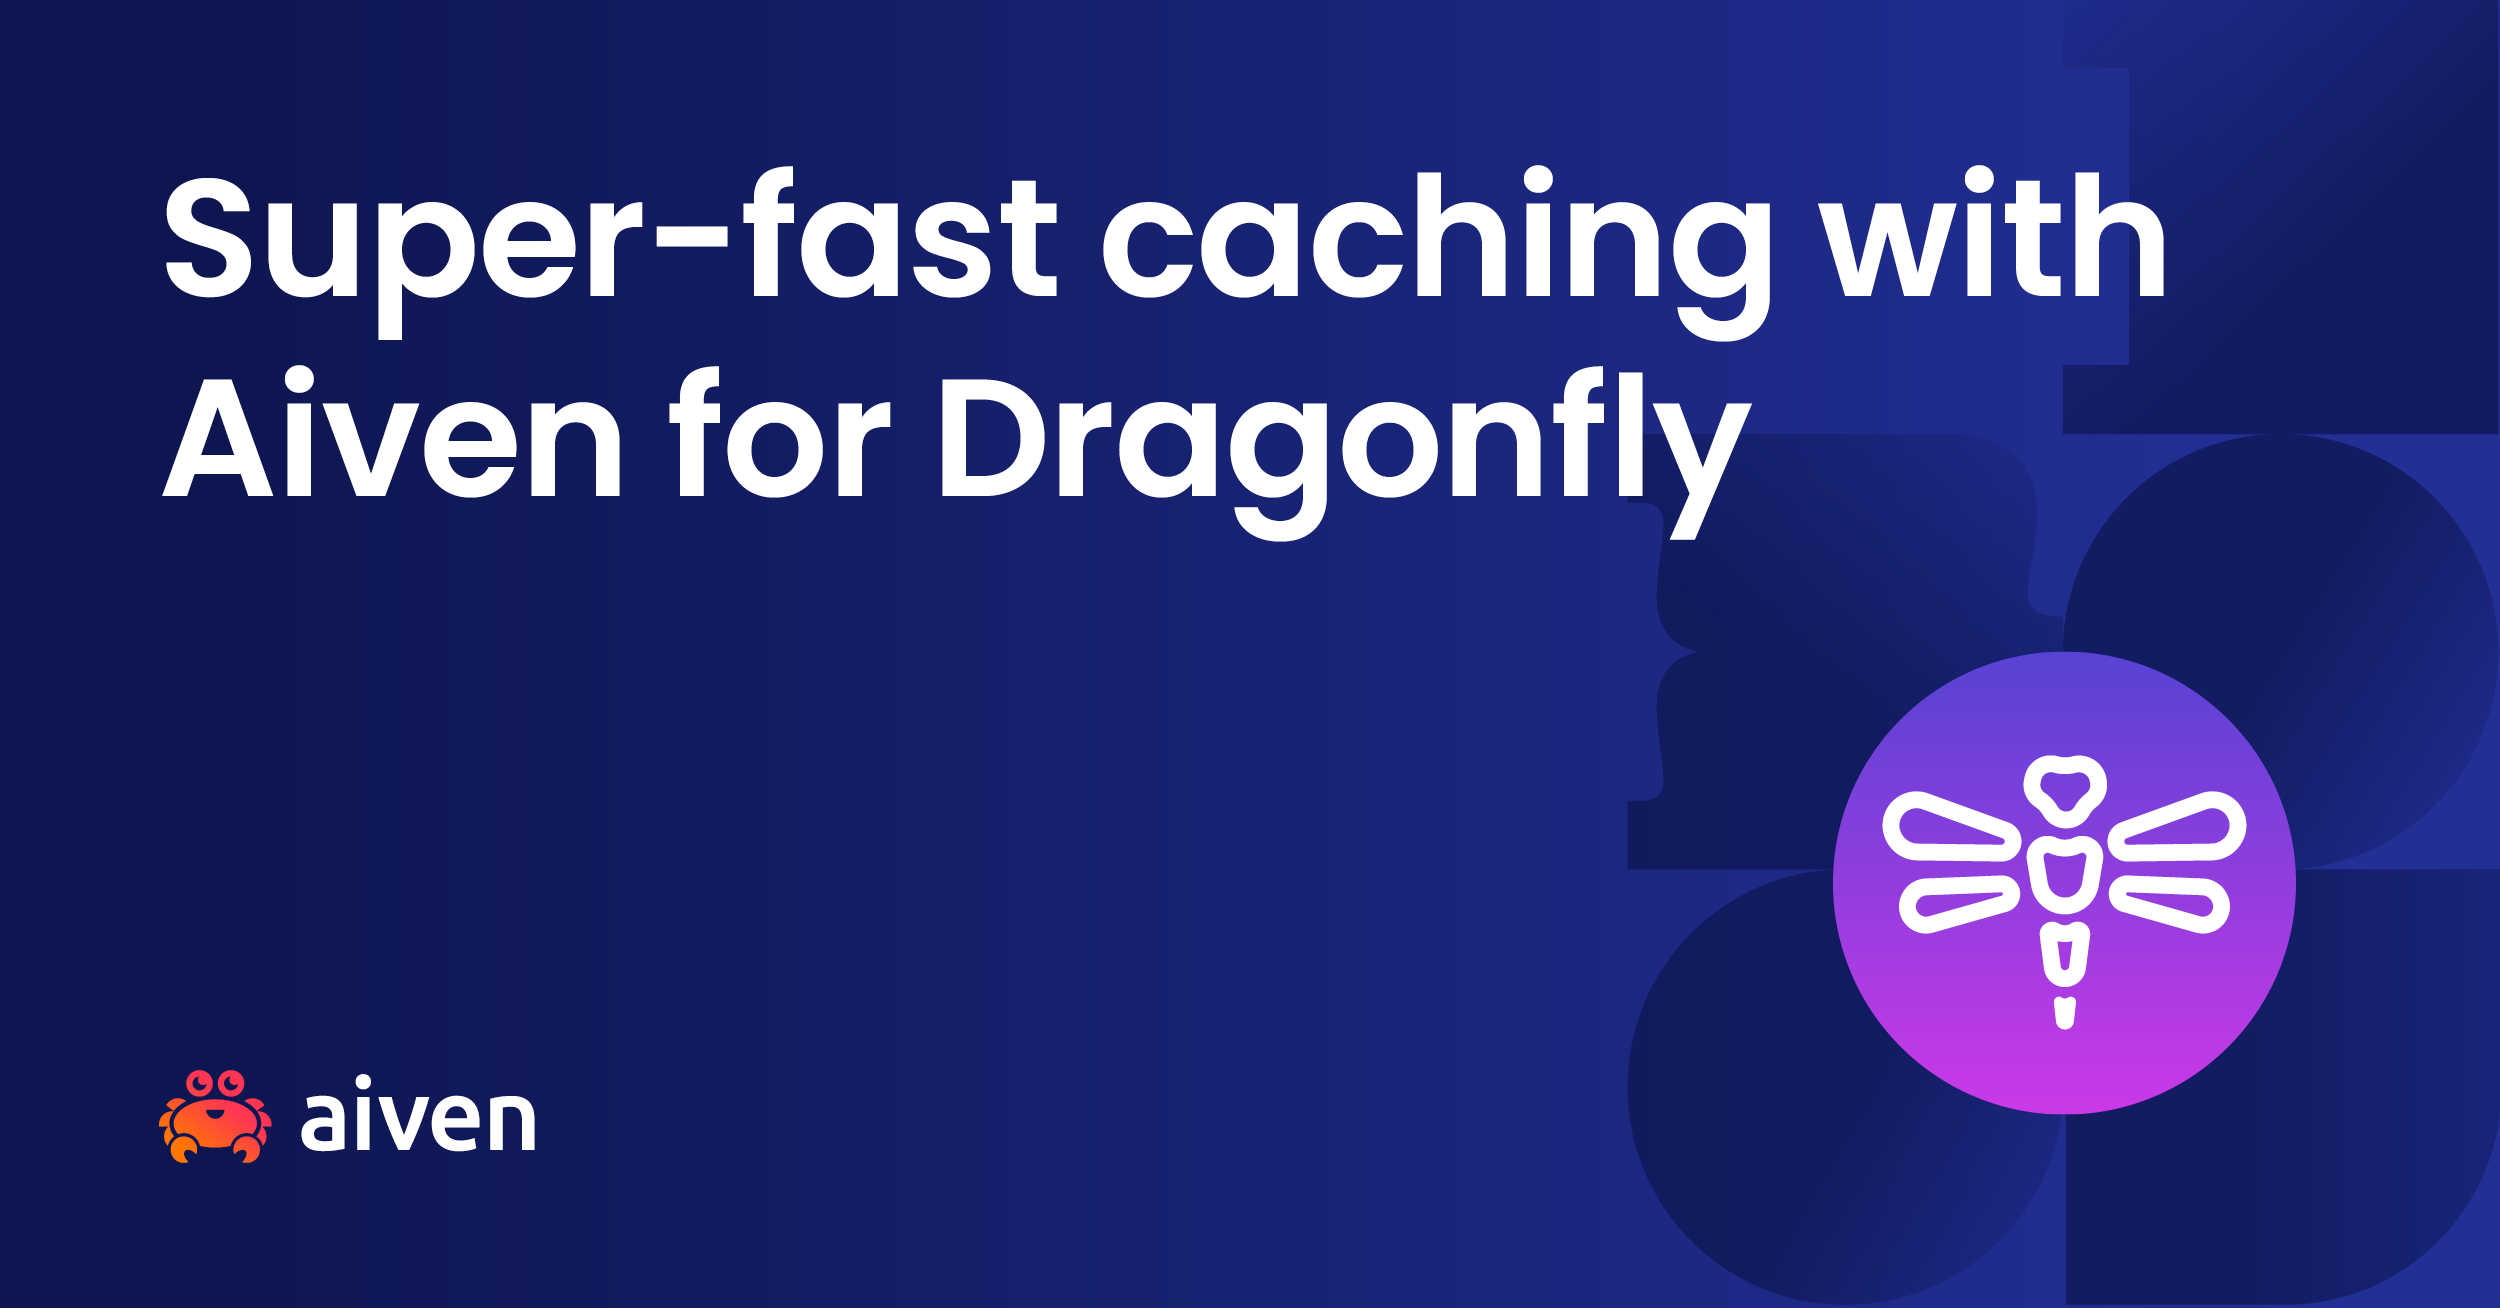 Blue background with the Aiven logo in the bottom left and dragonfly logo on the bottom right that reads "super-fast caching with Aiven for Dragonfly"